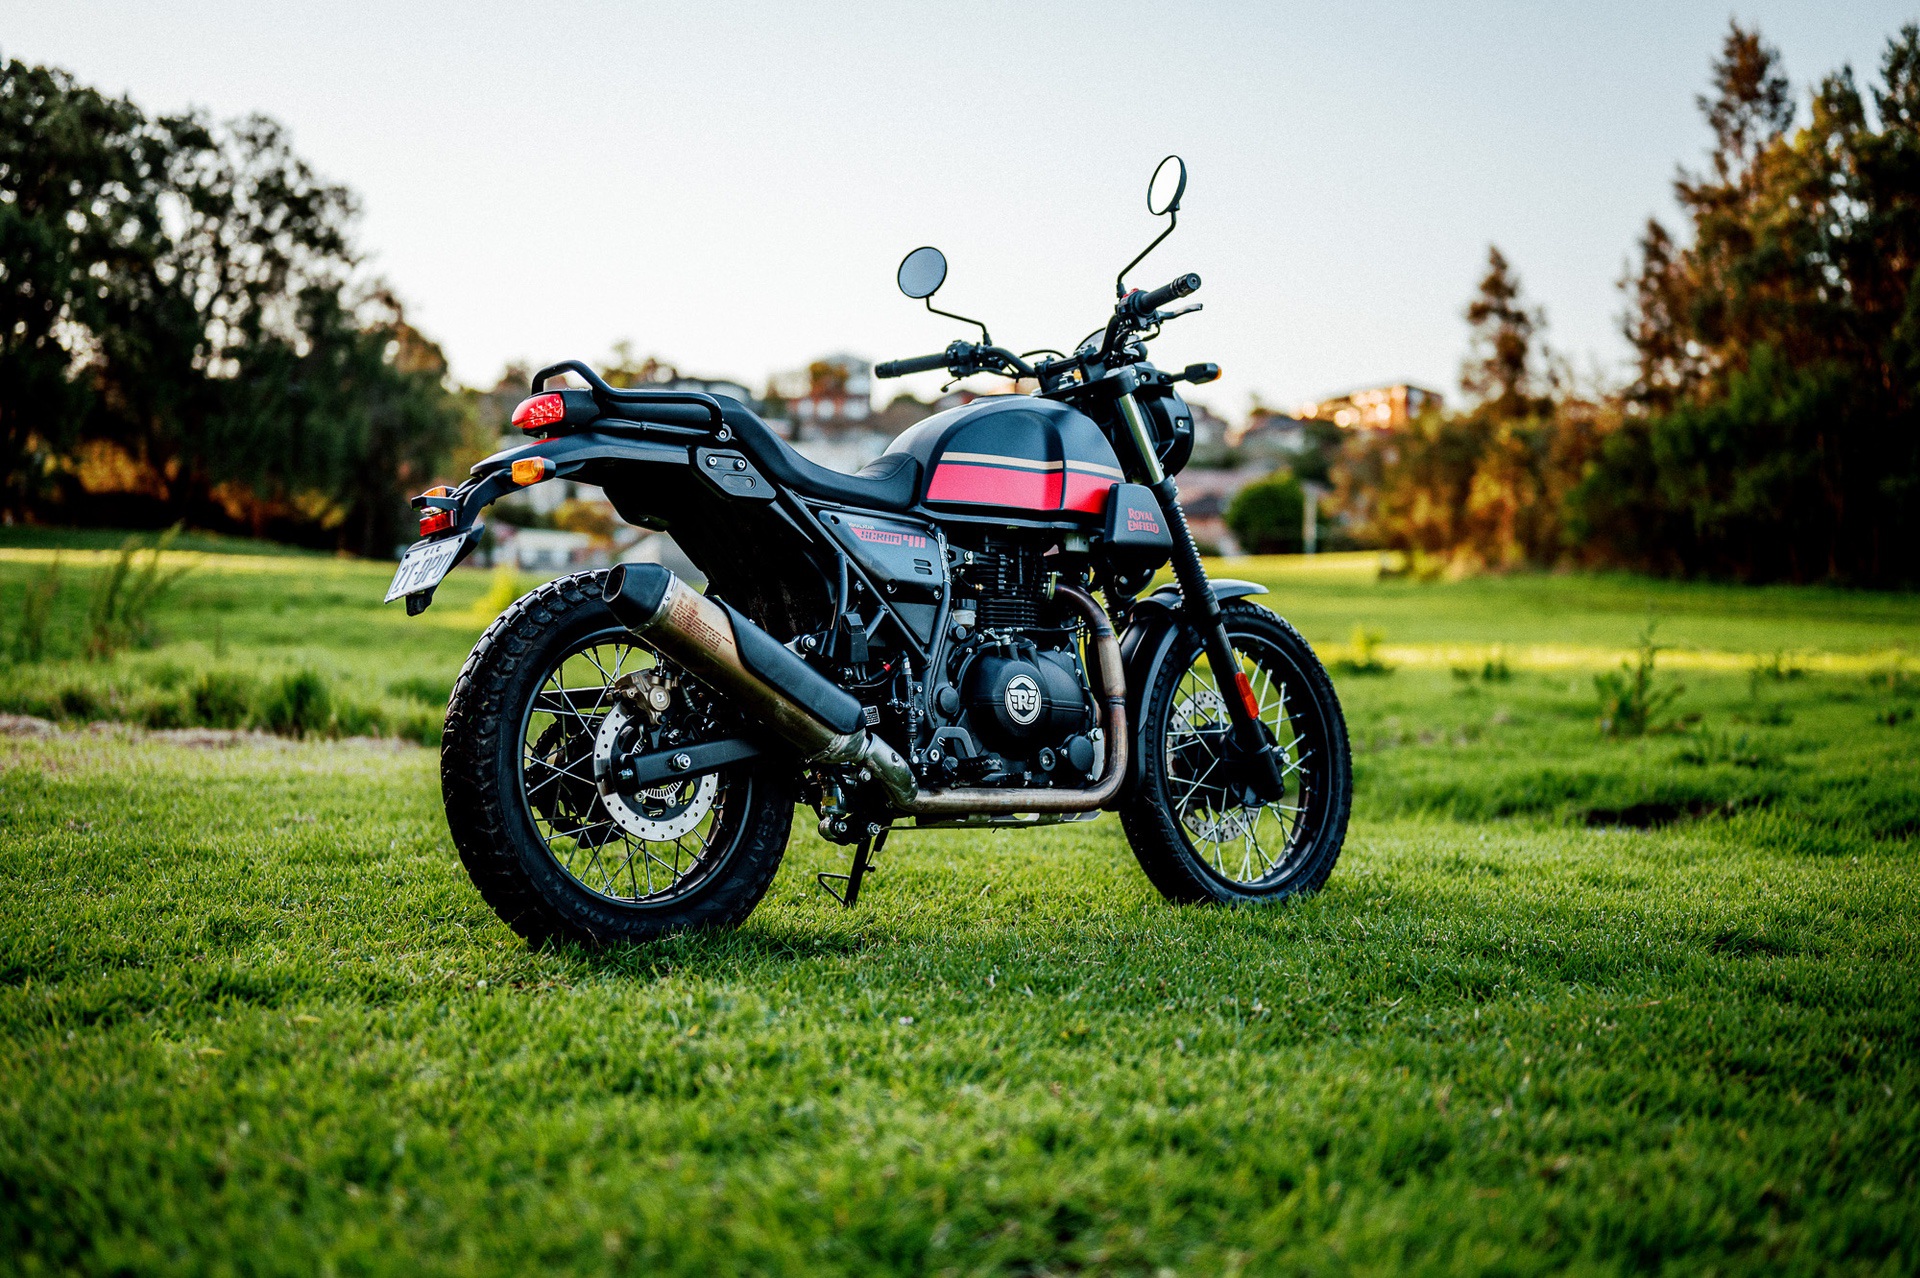 A 2022 Royal Enfield Scram 411 motorcycle in a park at dusk